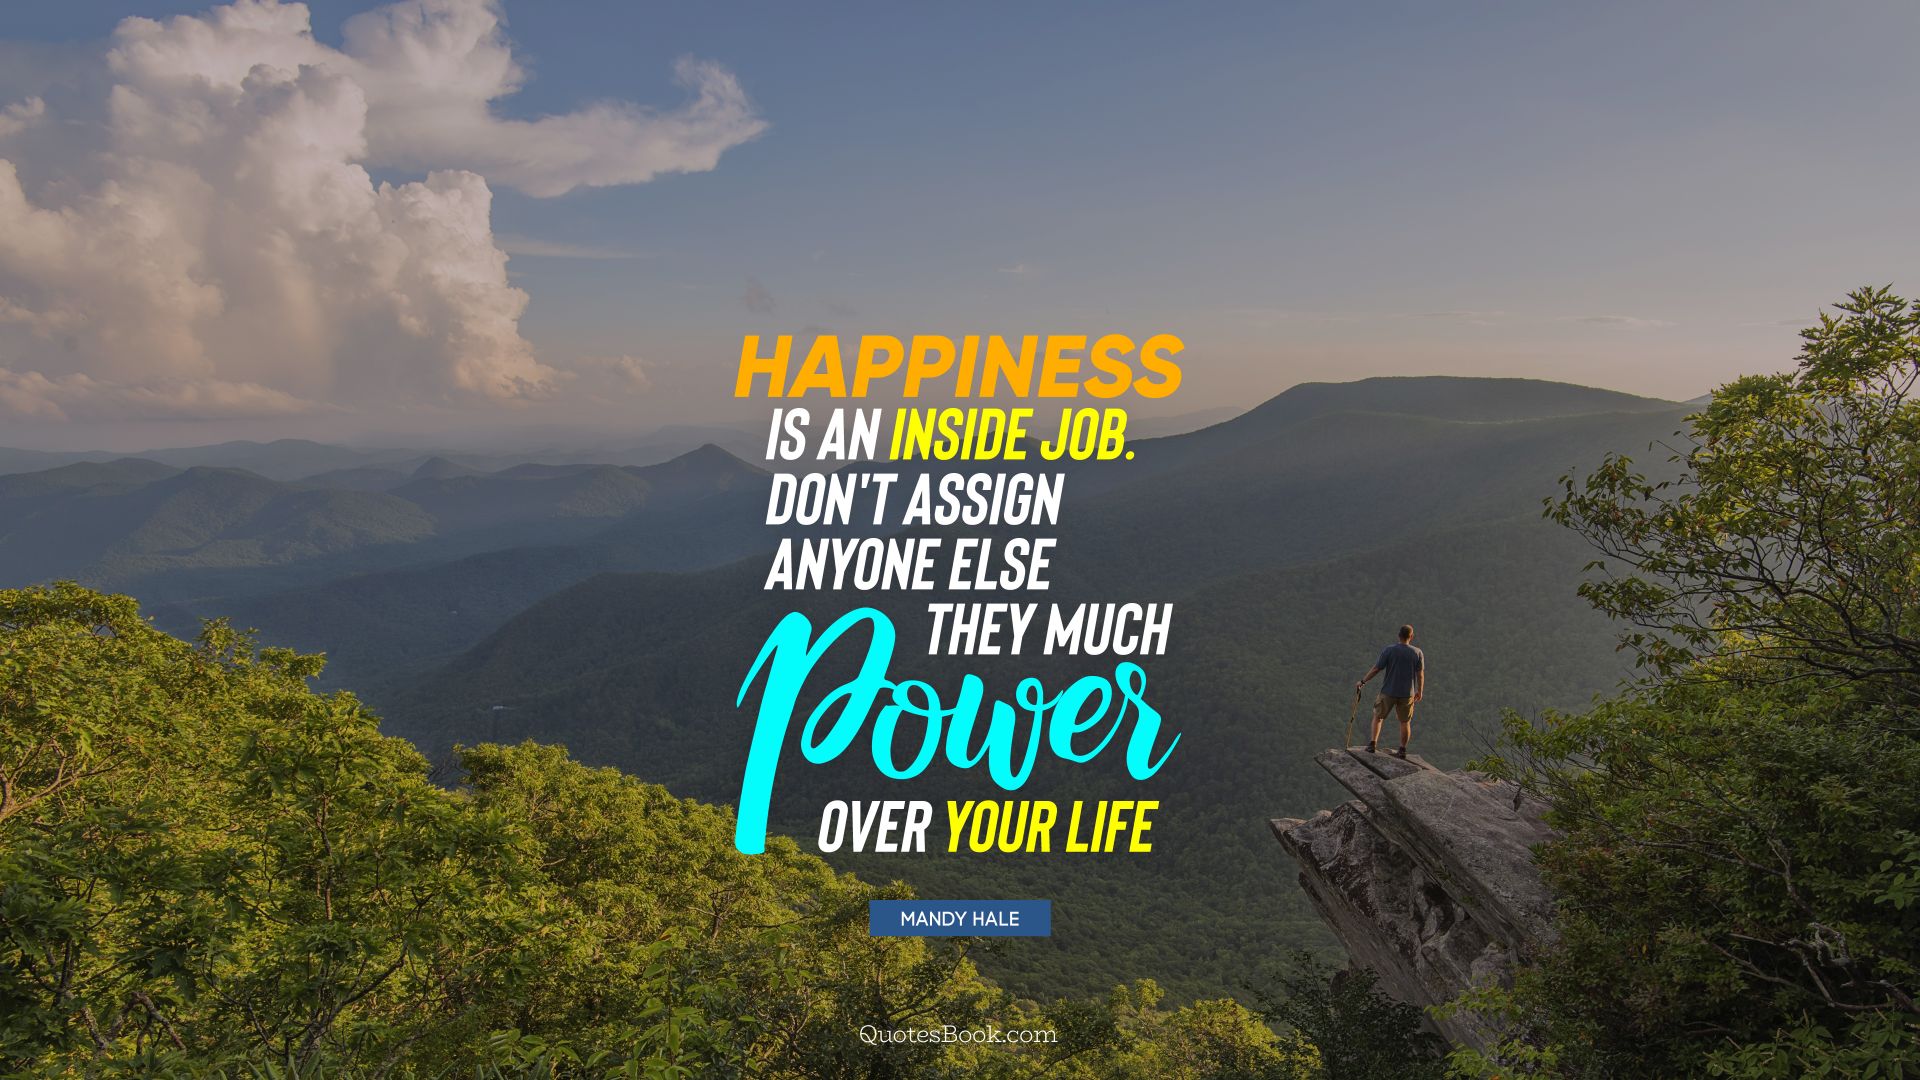 Happiness is an inside job. Don't assign anyone else they much power over your life. - Quote by Mandy Hale